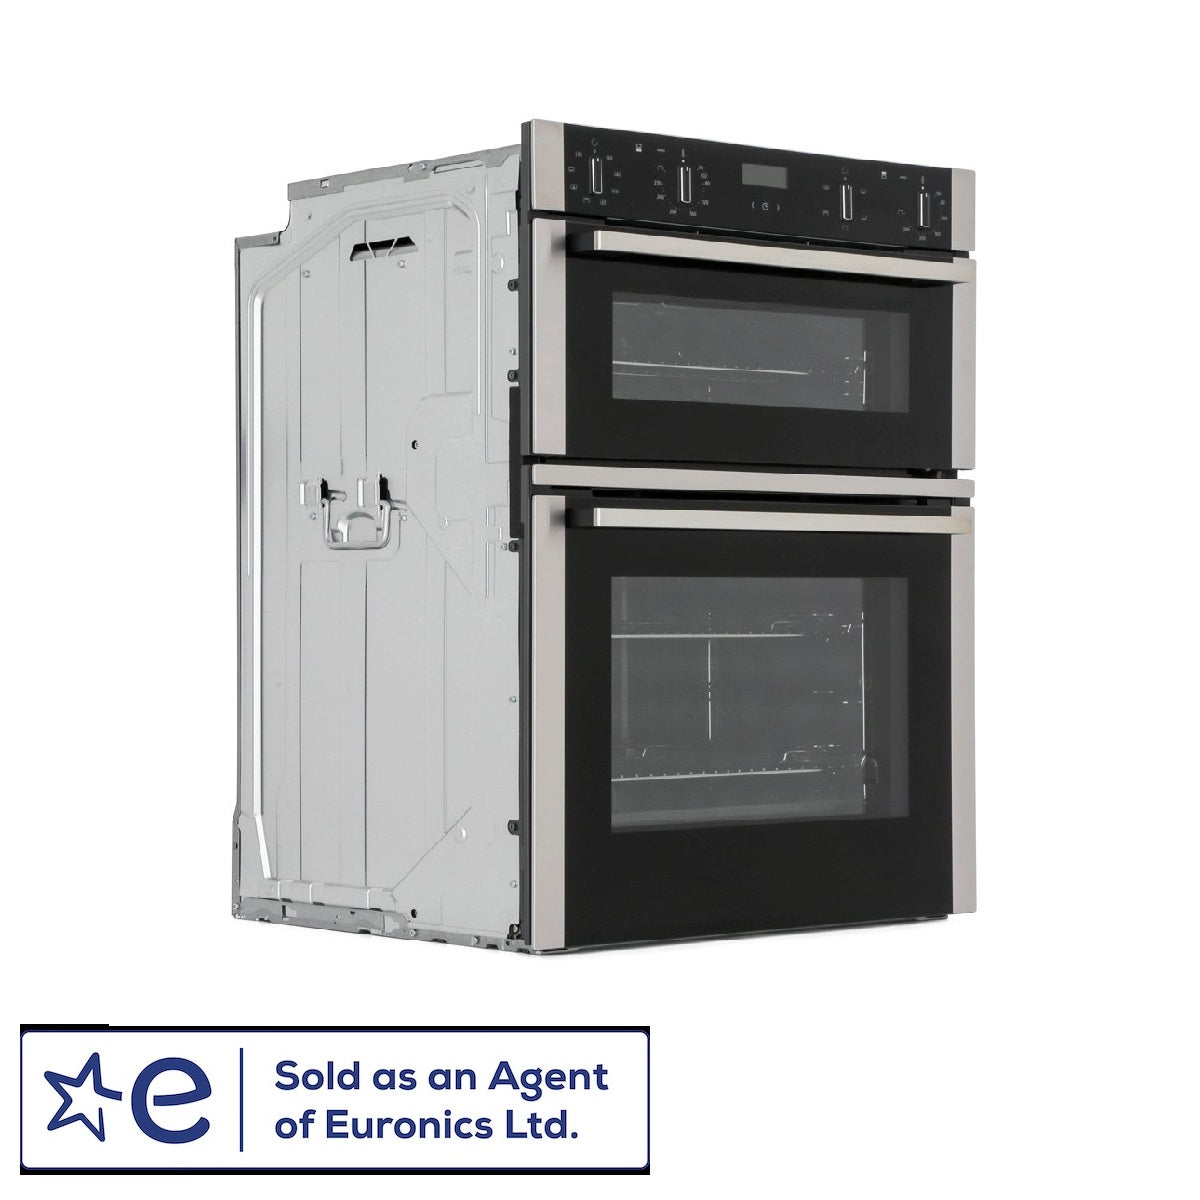 Neff U1ACE2HNOB N50 Built-In Electric Double Oven